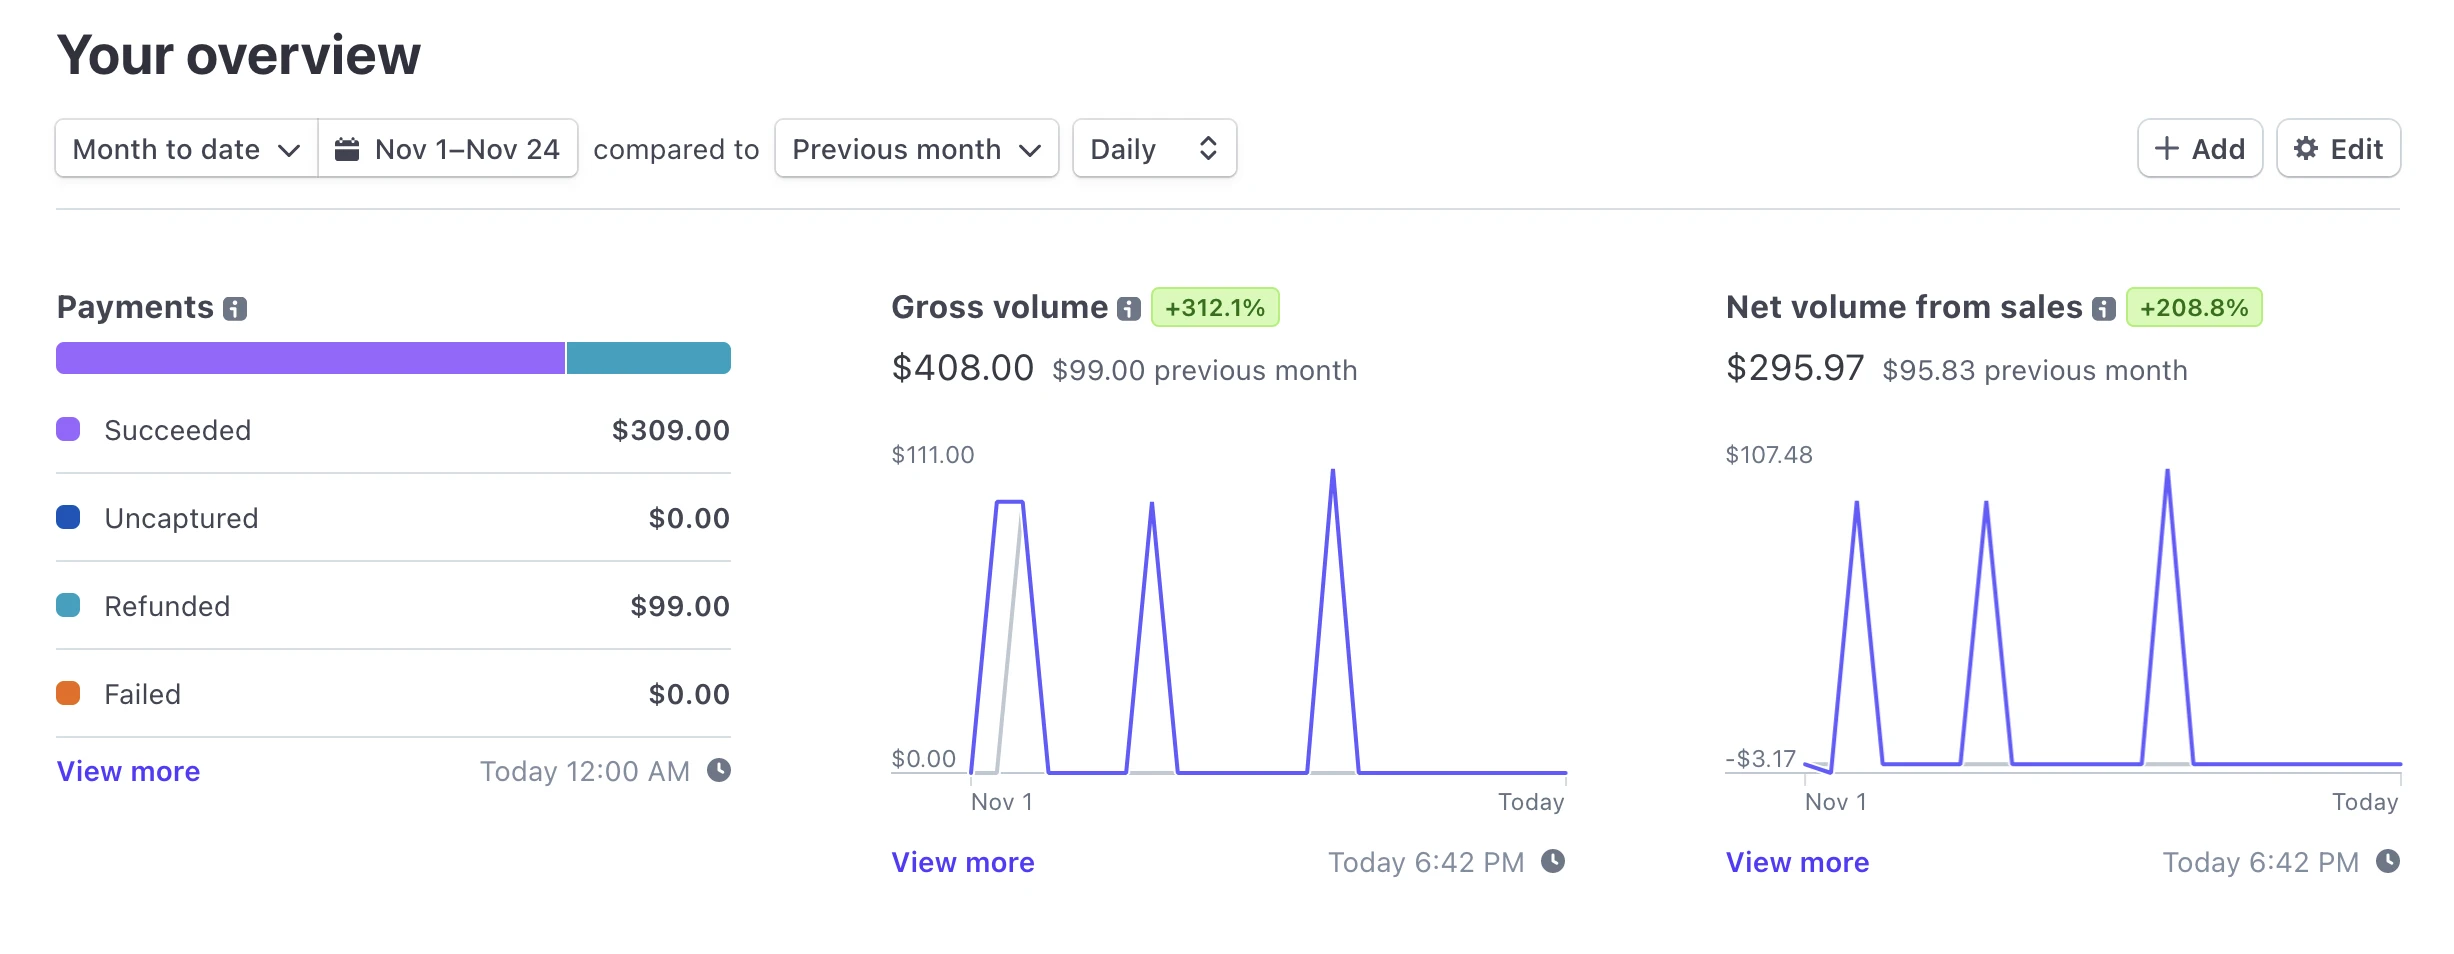 Stripe dashboard screenshot displaying Tampa Devs Talent's gross and net volume for the month of November.